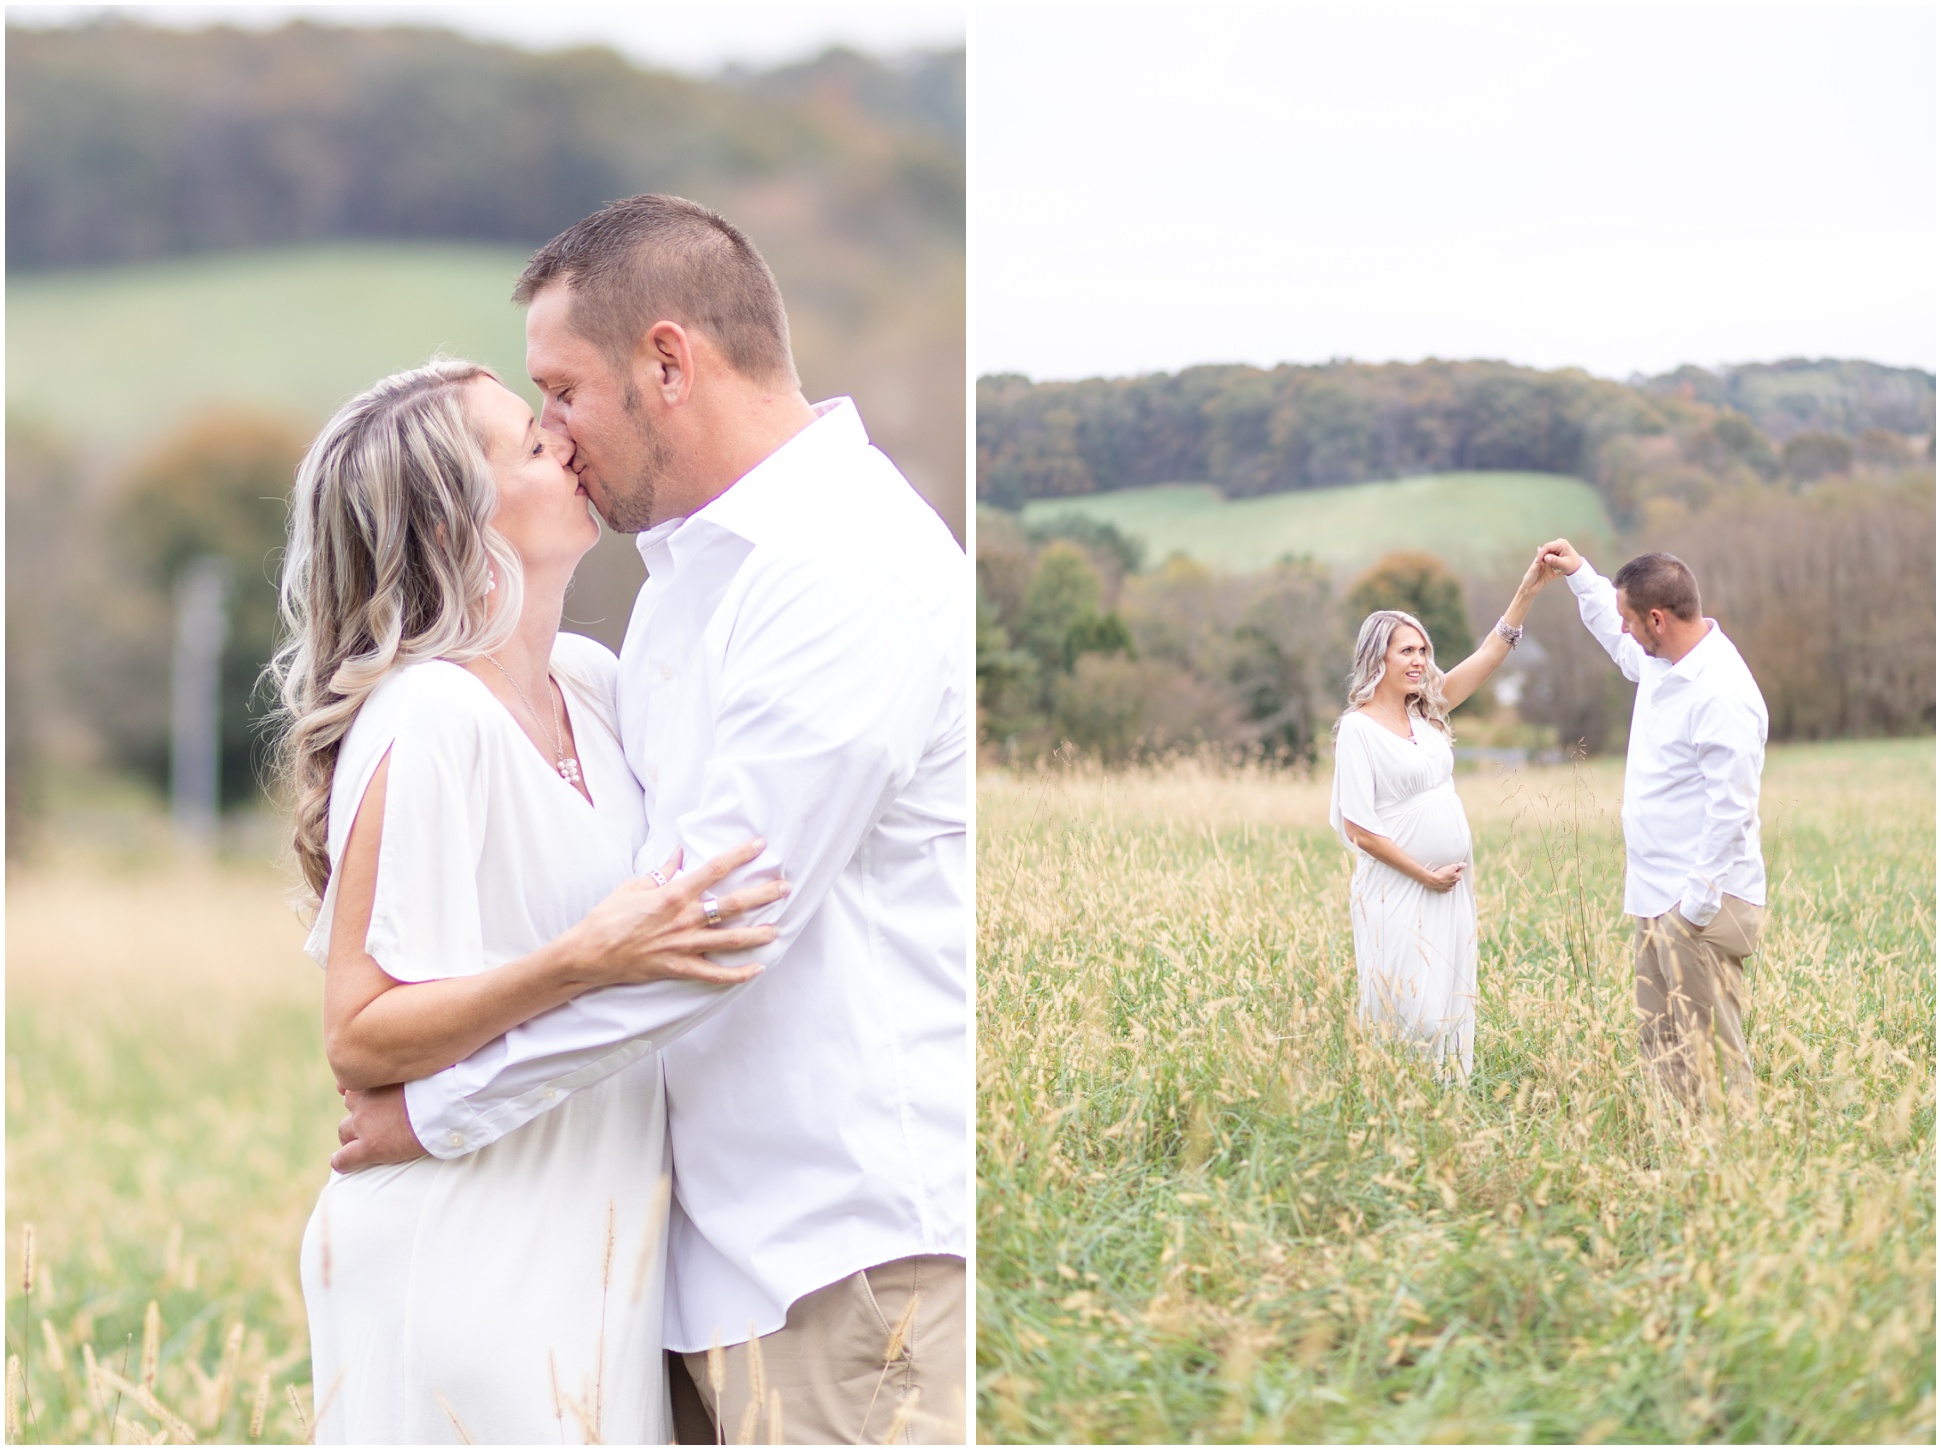 Rebecca and Scott in the field for their maternity session. Rebecca in a white dress with a fall flower crown